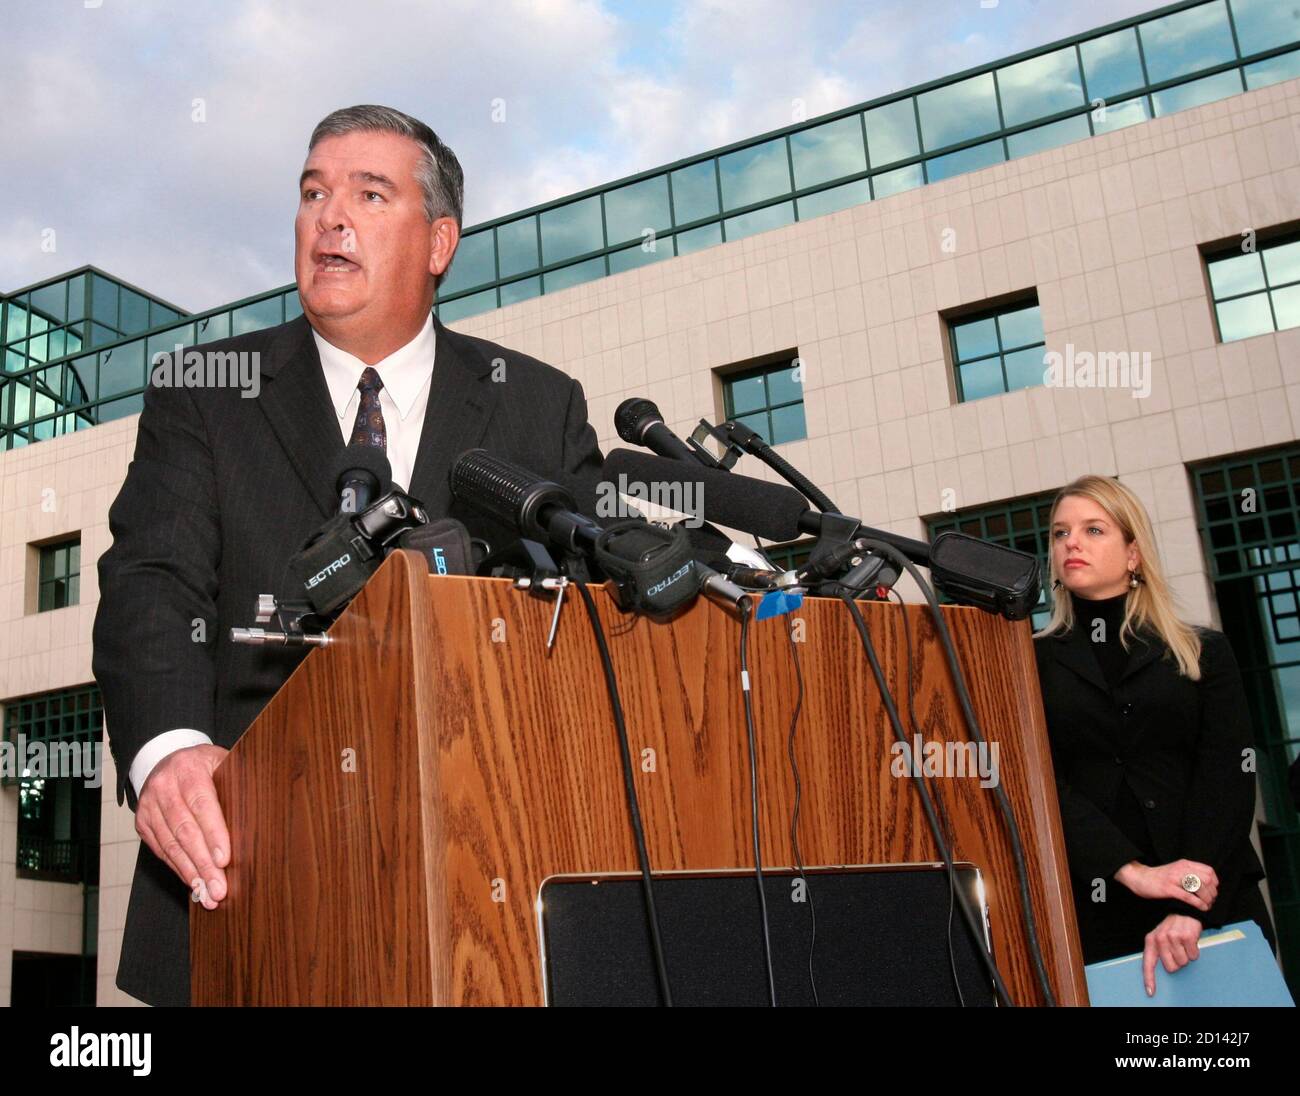 State Attorney Mark Ober (L), appointed by Florida Governor Jeb Bush to prosecute the Martin Lee Anderson case, speaks to reporters in front of the Leon County Florida Courthouse November 28, 2006 after charges were filed against seven guards and one nurse in Bay County Florida for the aggravated manslaughter of 14-year-old Martin Lee Anderson at the Bay County Florida juvenile boot camp in January 2006.  Prosecutor Pamela Bondi is at right.  REUTERS/Mark Wallheiser (UNITED STATES) Stock Photo